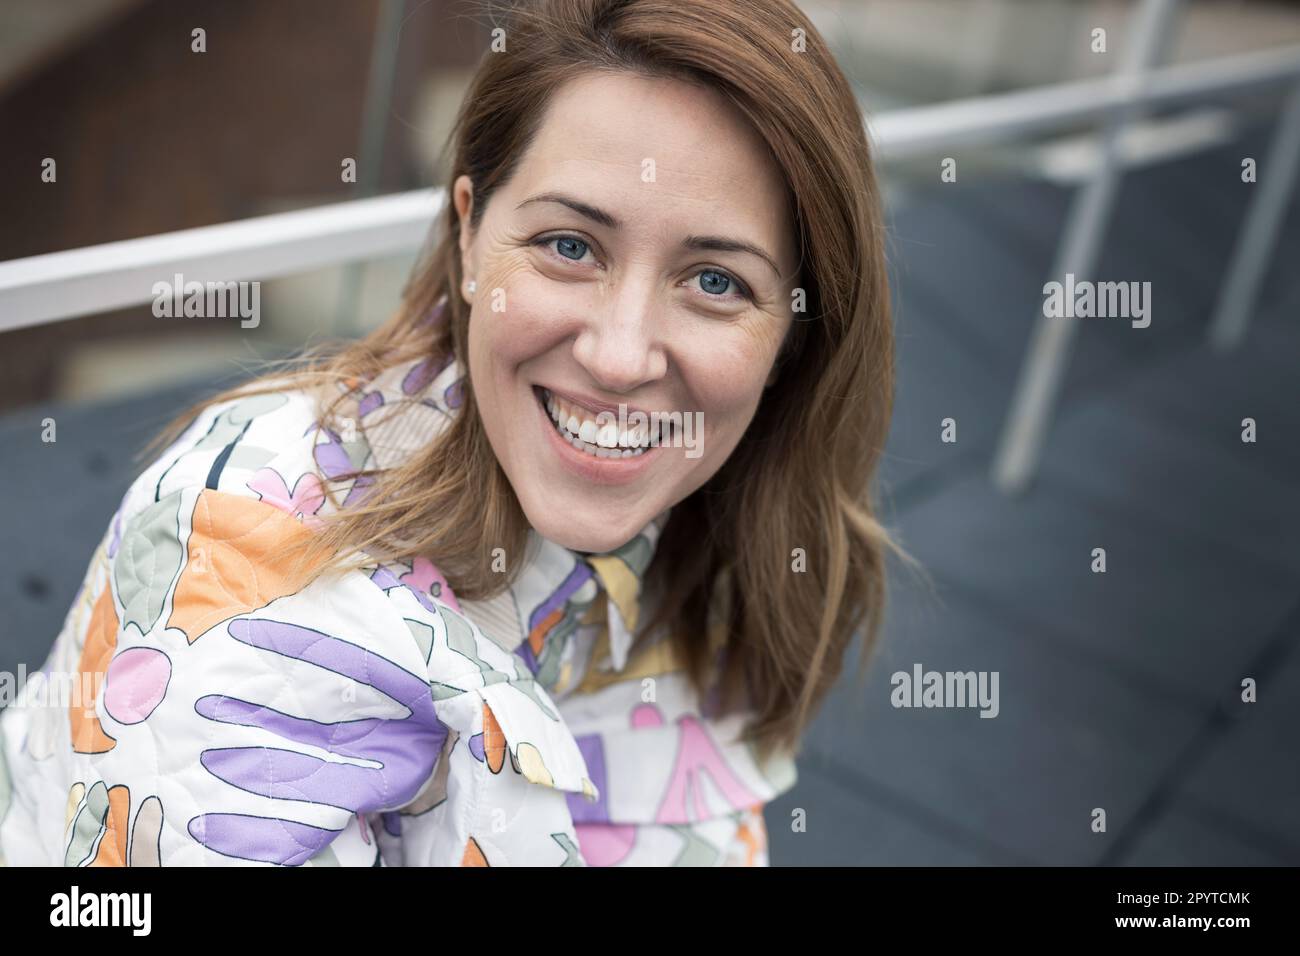 Portrait of happy and smiling female. Stock Photo